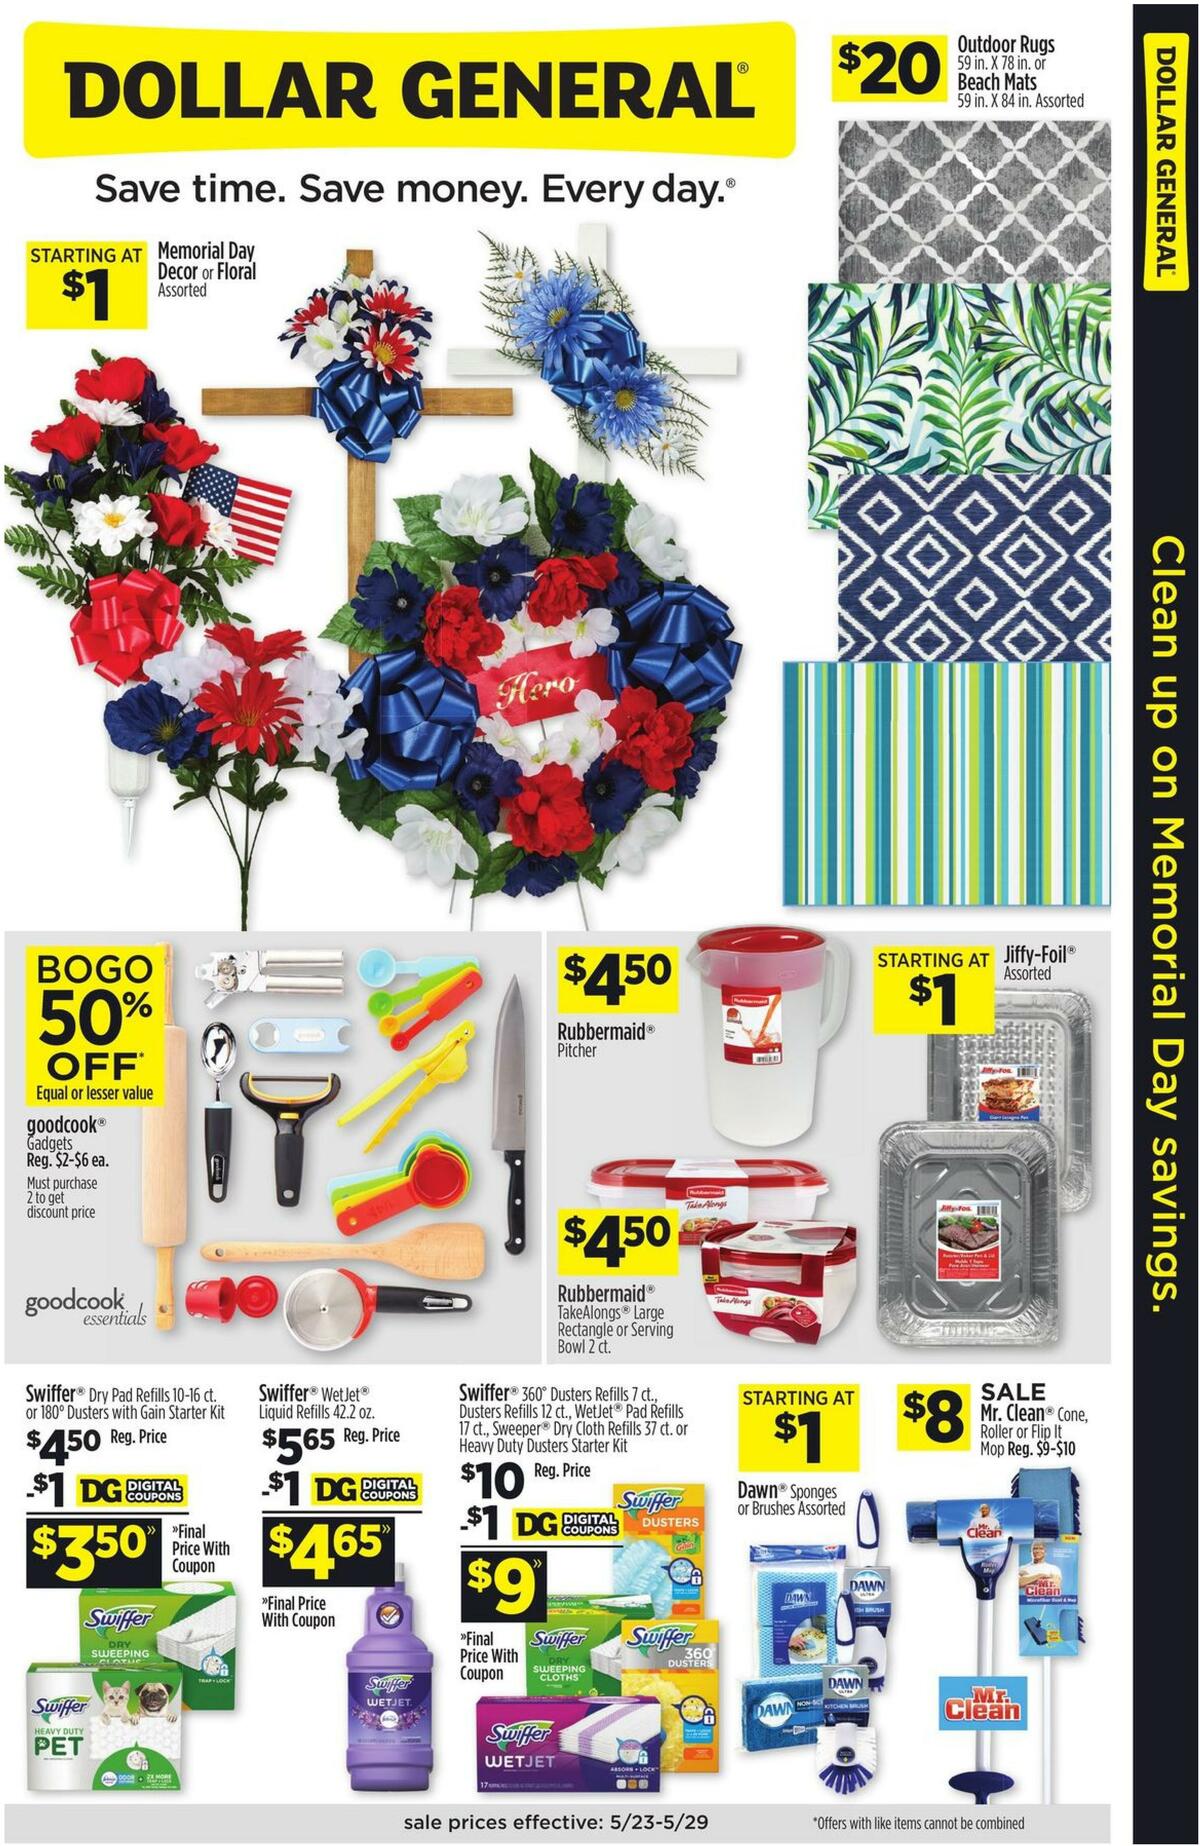 Dollar General Clean Up On Memorial Day Savings Weekly Ad from May 23